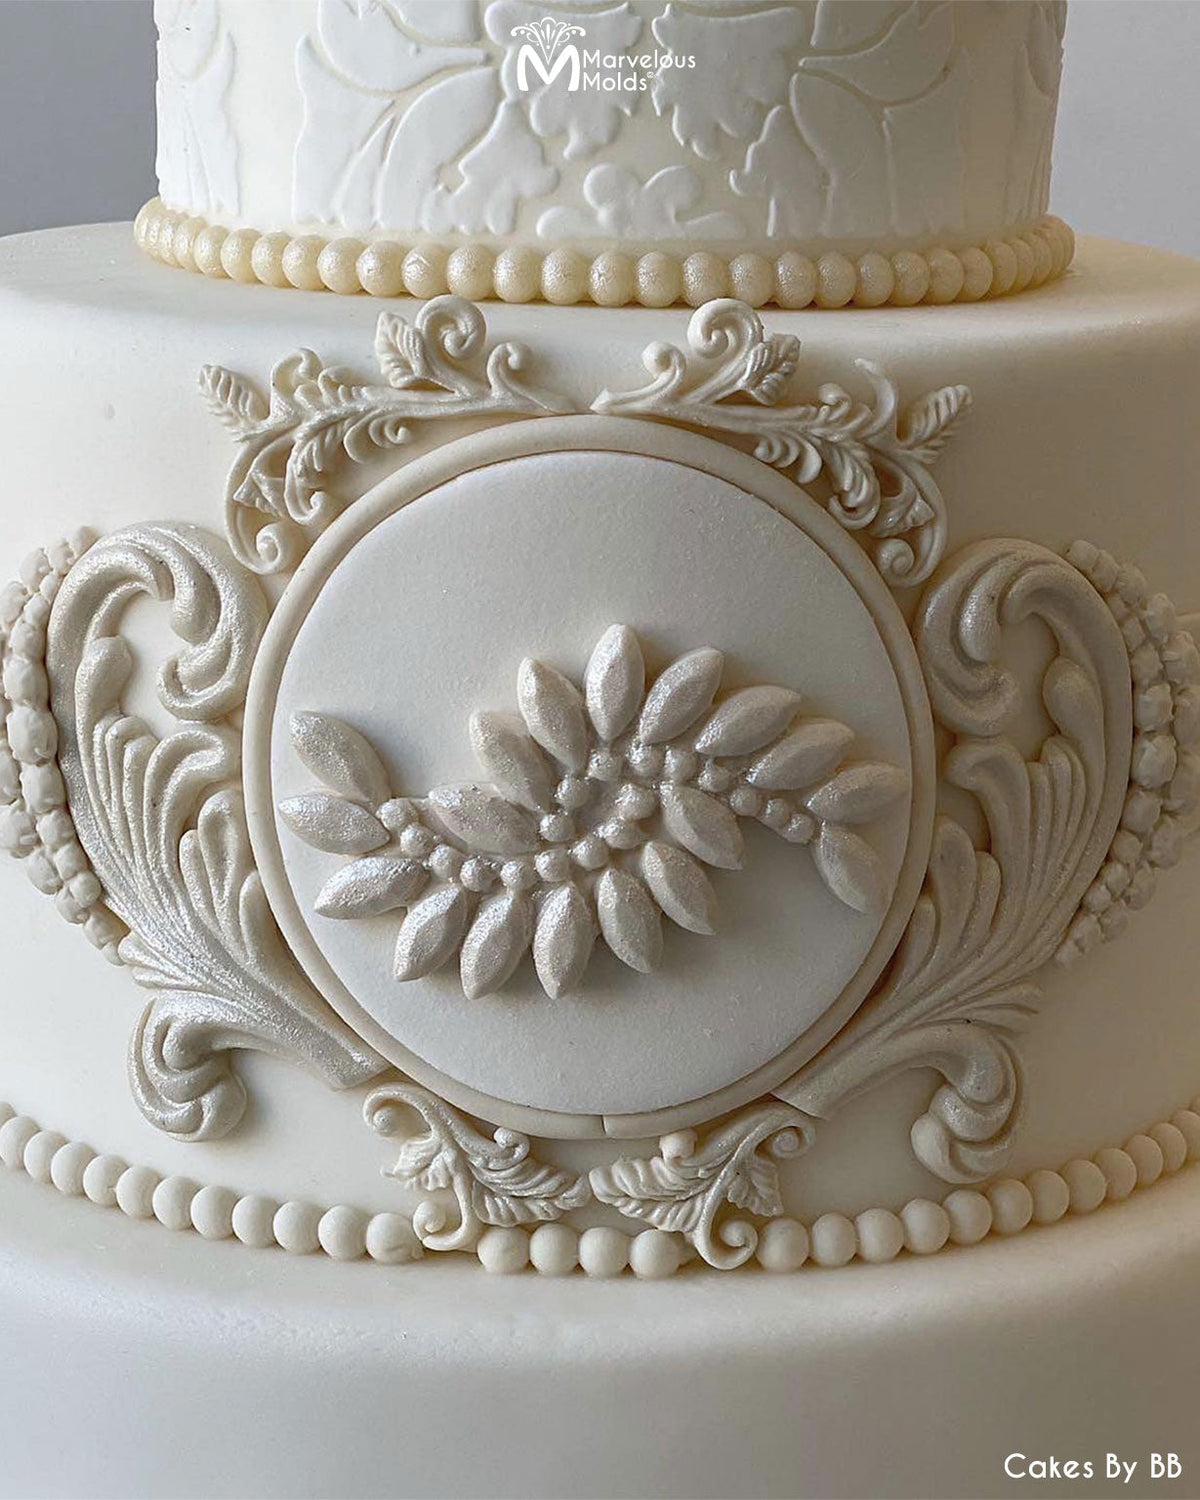 White Wedding Cake with Jeweled Decorations, Created Using the Swanky Brooch Silicone Mold by Marvelous Molds